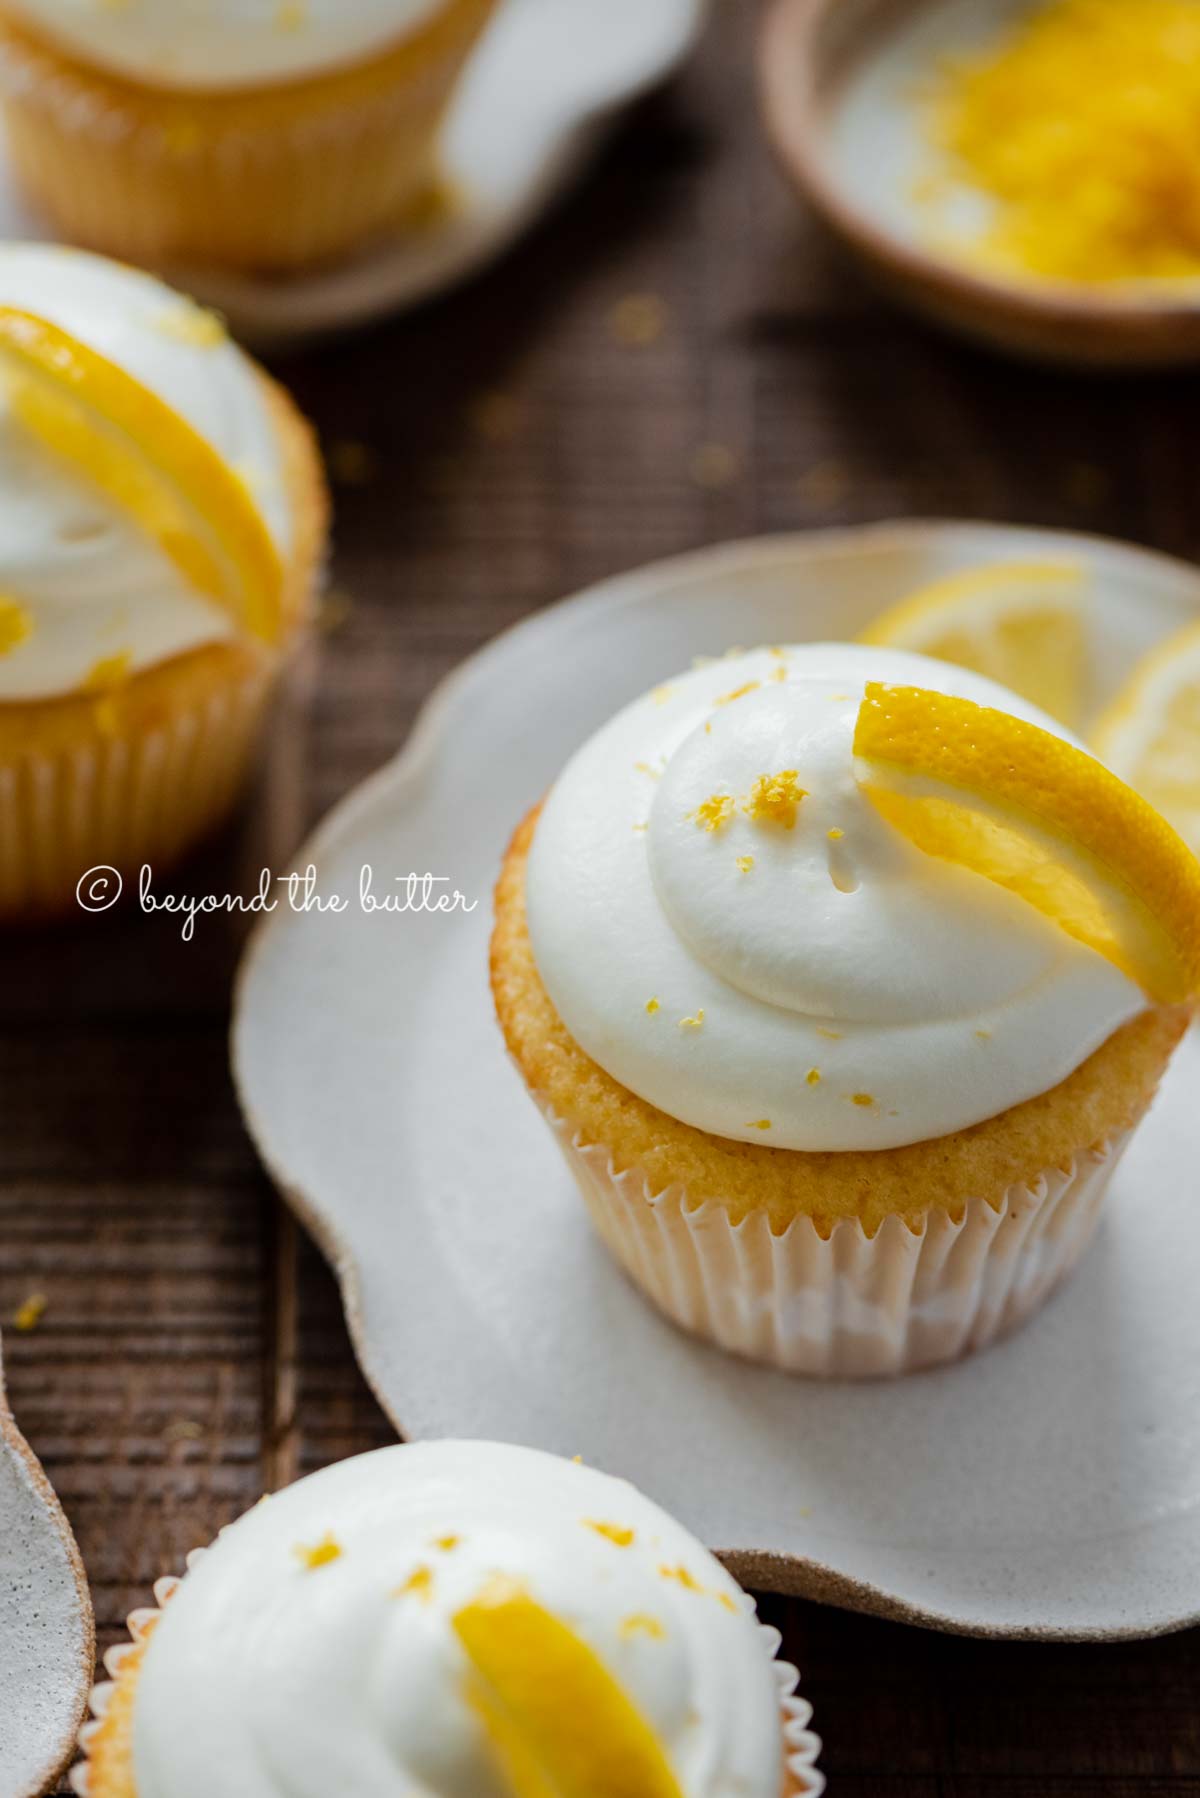 Lemon cupcakes with lemon cream cheese frosting garnished with lemons on small wavy dessert plates | All Images © Beyond the Butter®